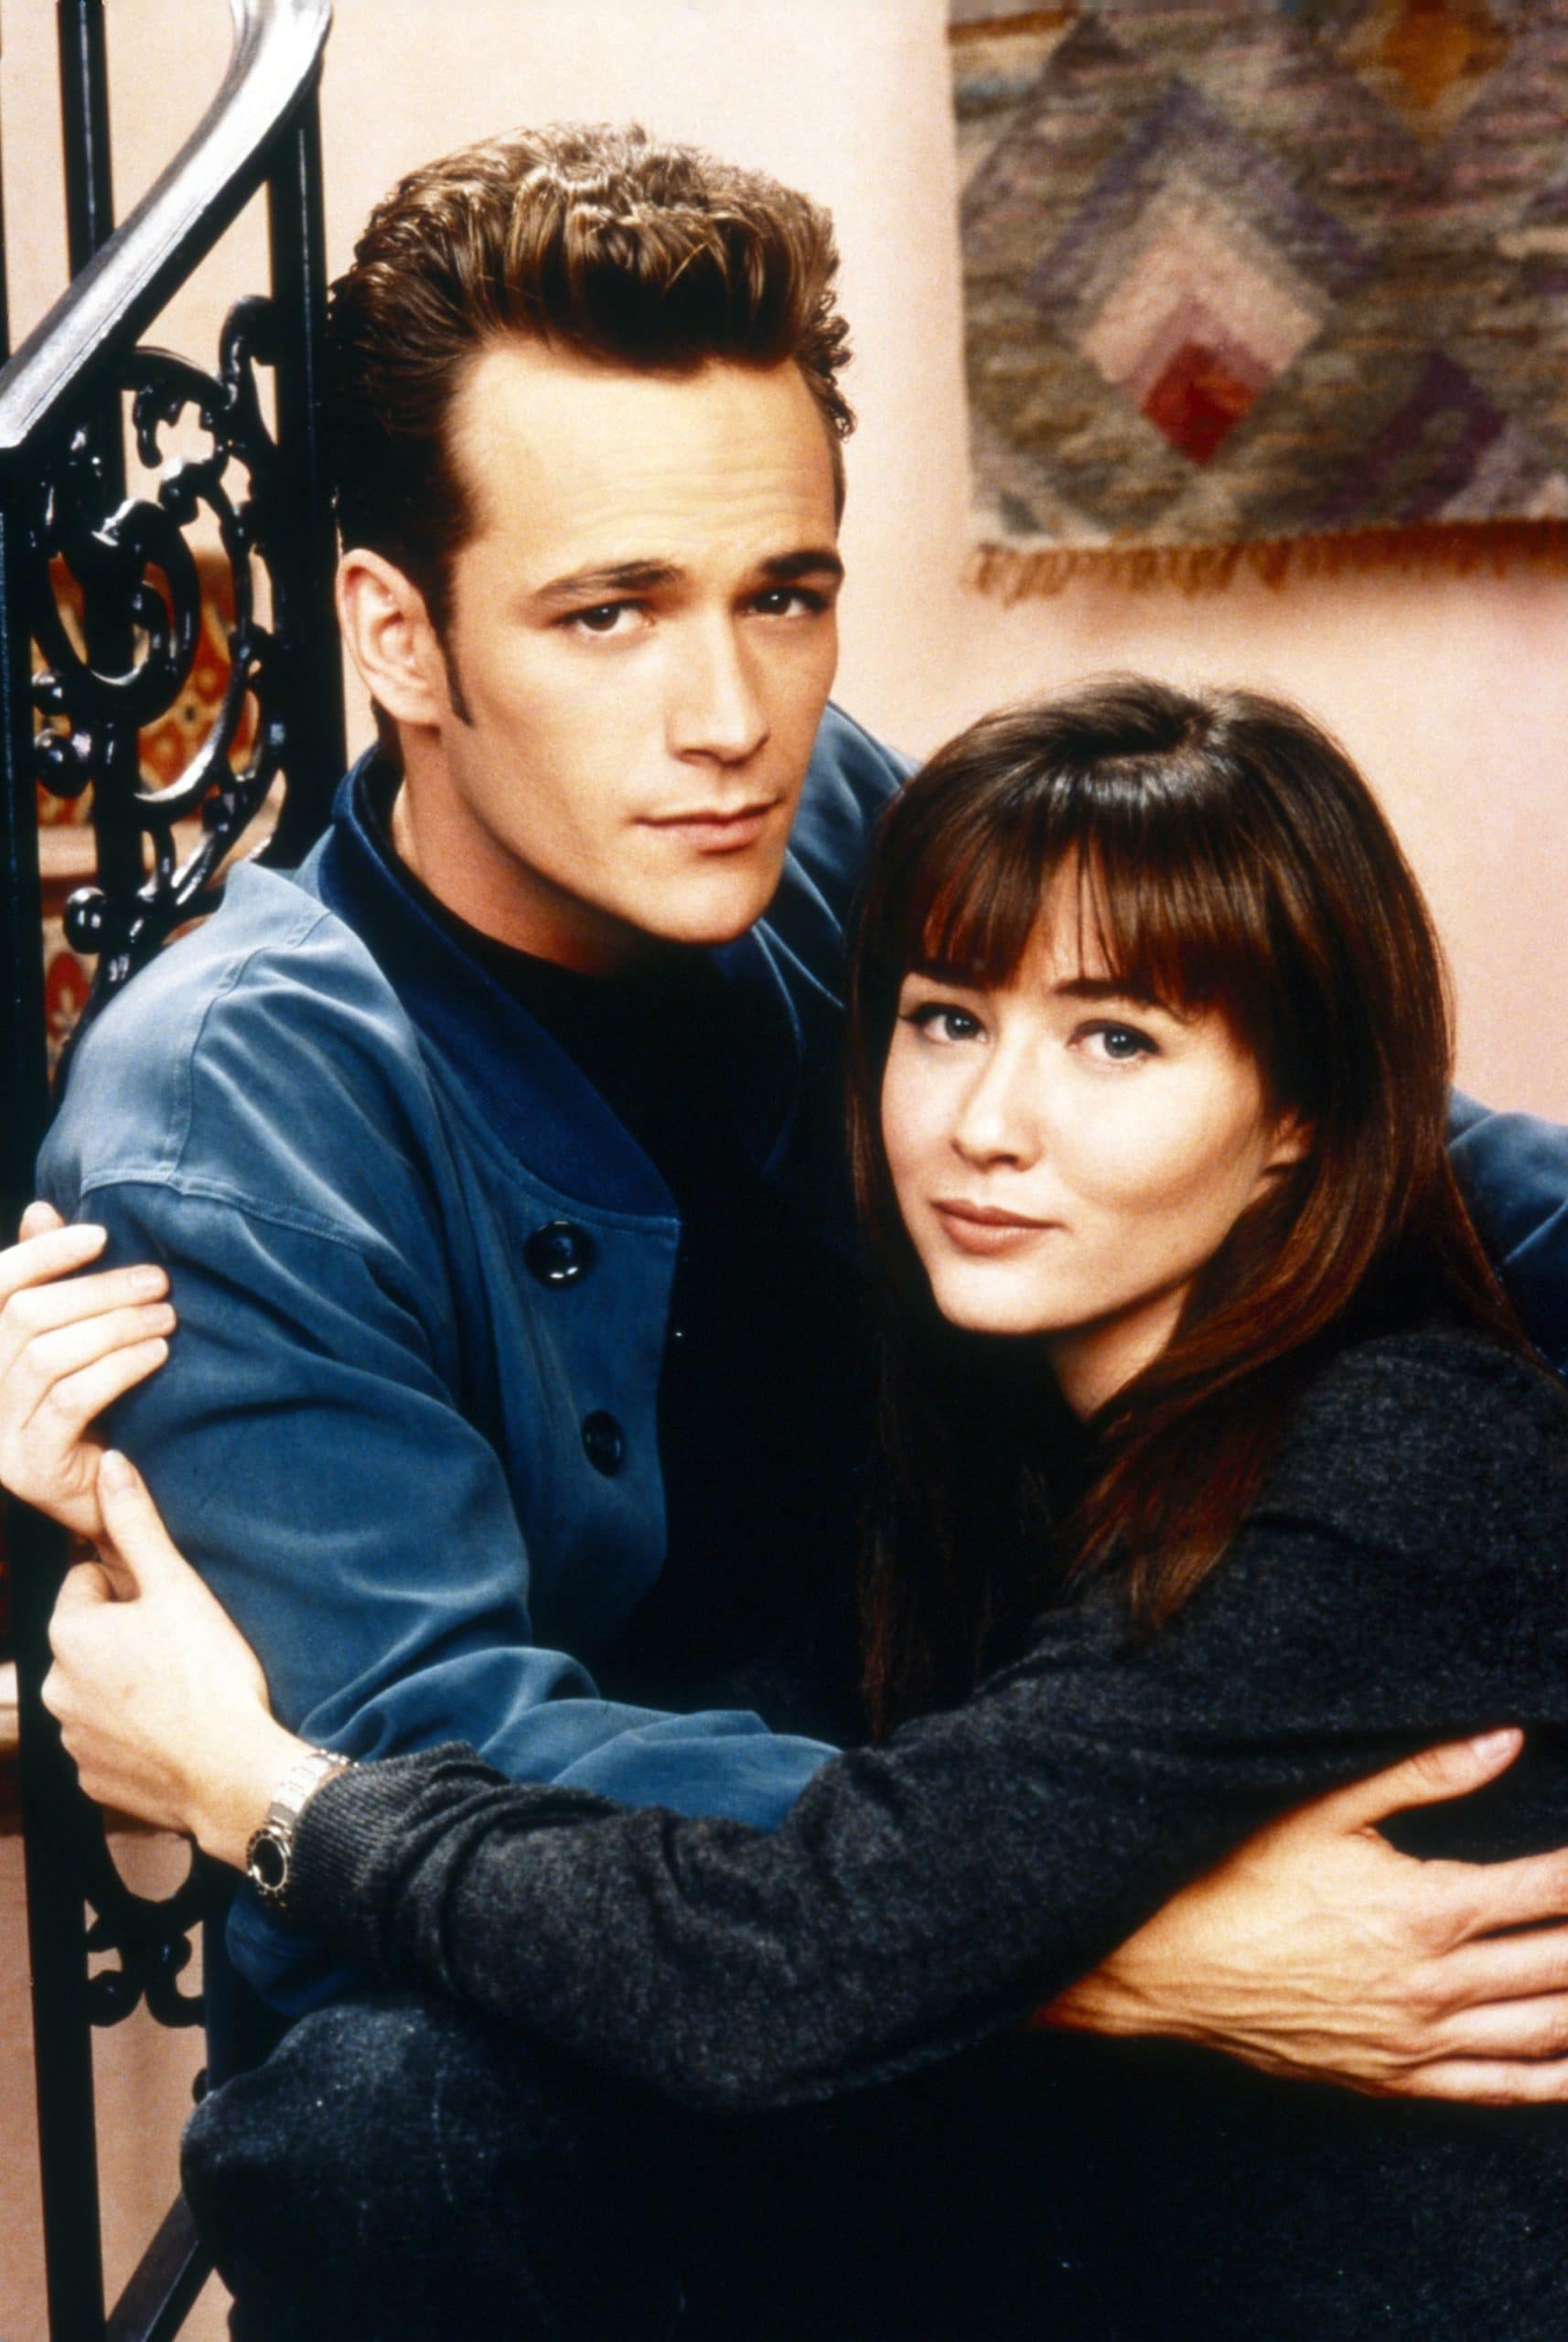 BEVERLY HILLS, 90210, from left: Luke Perry, Shannen Doherty, 1990-2000